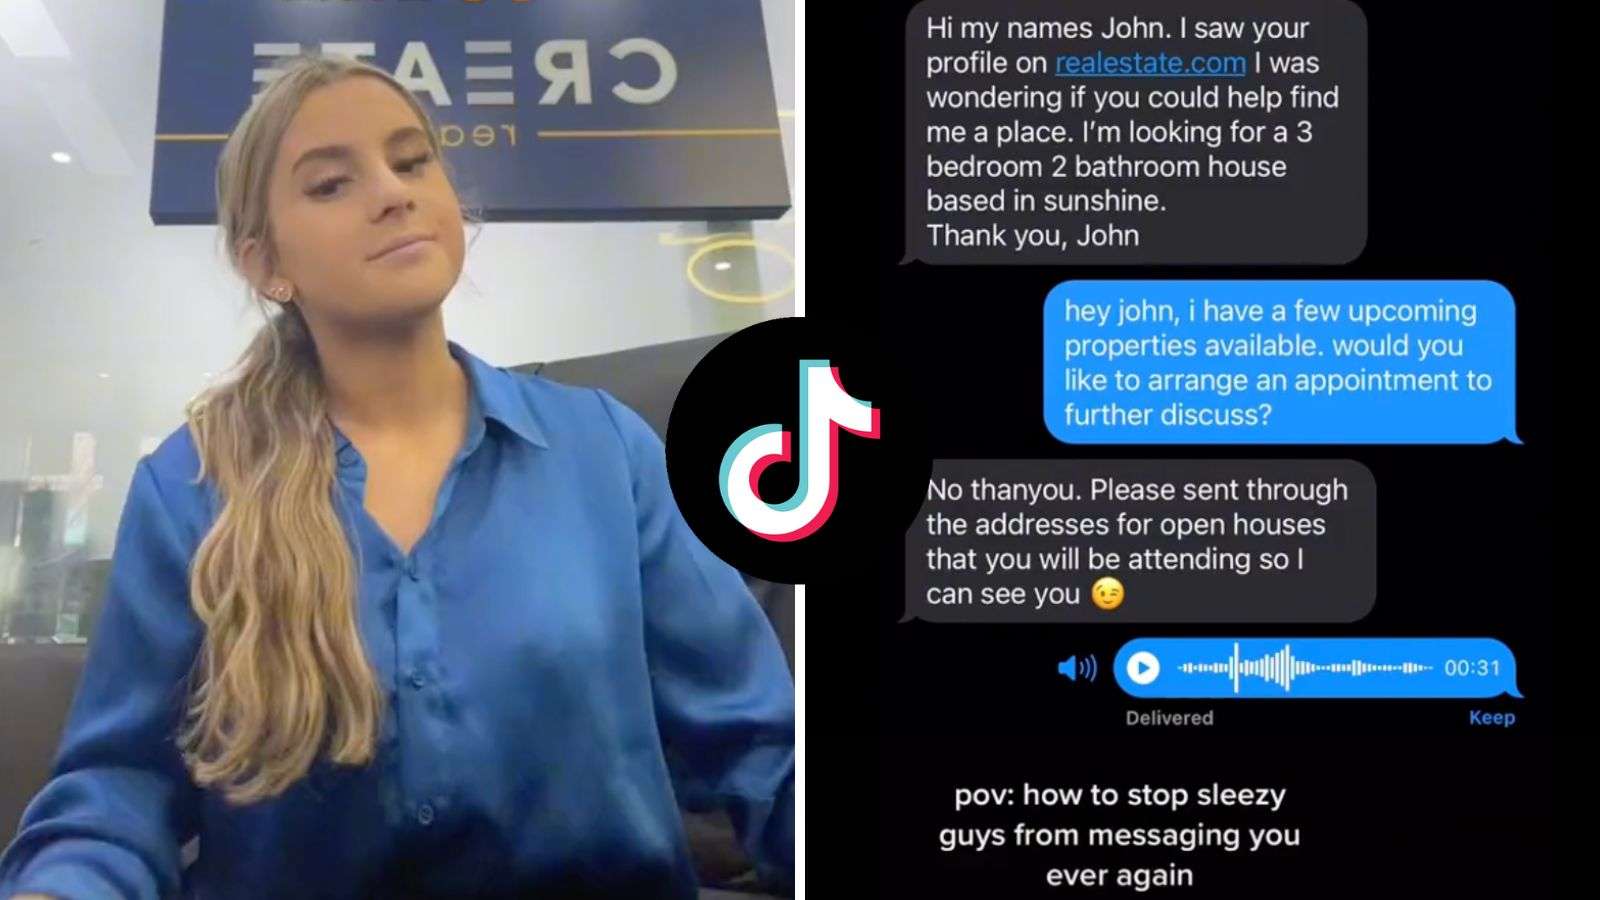 TikTok real estate agent goes viral responding to client’s ‘sleazy’ messages